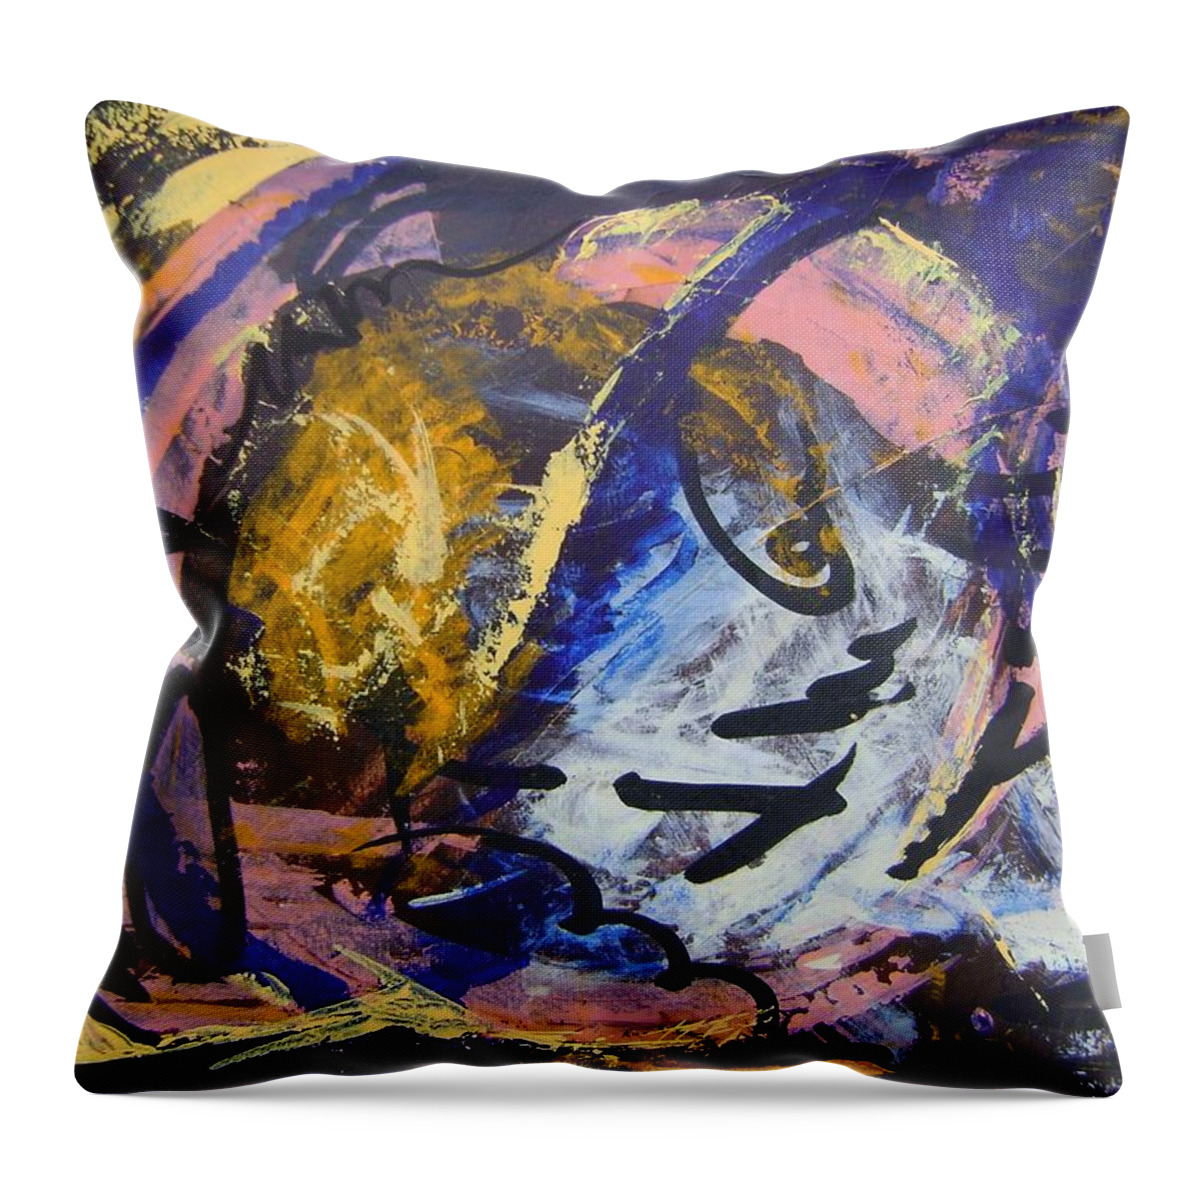 Who Am I? Throw Pillow featuring the painting Who am I? by Therese Legere